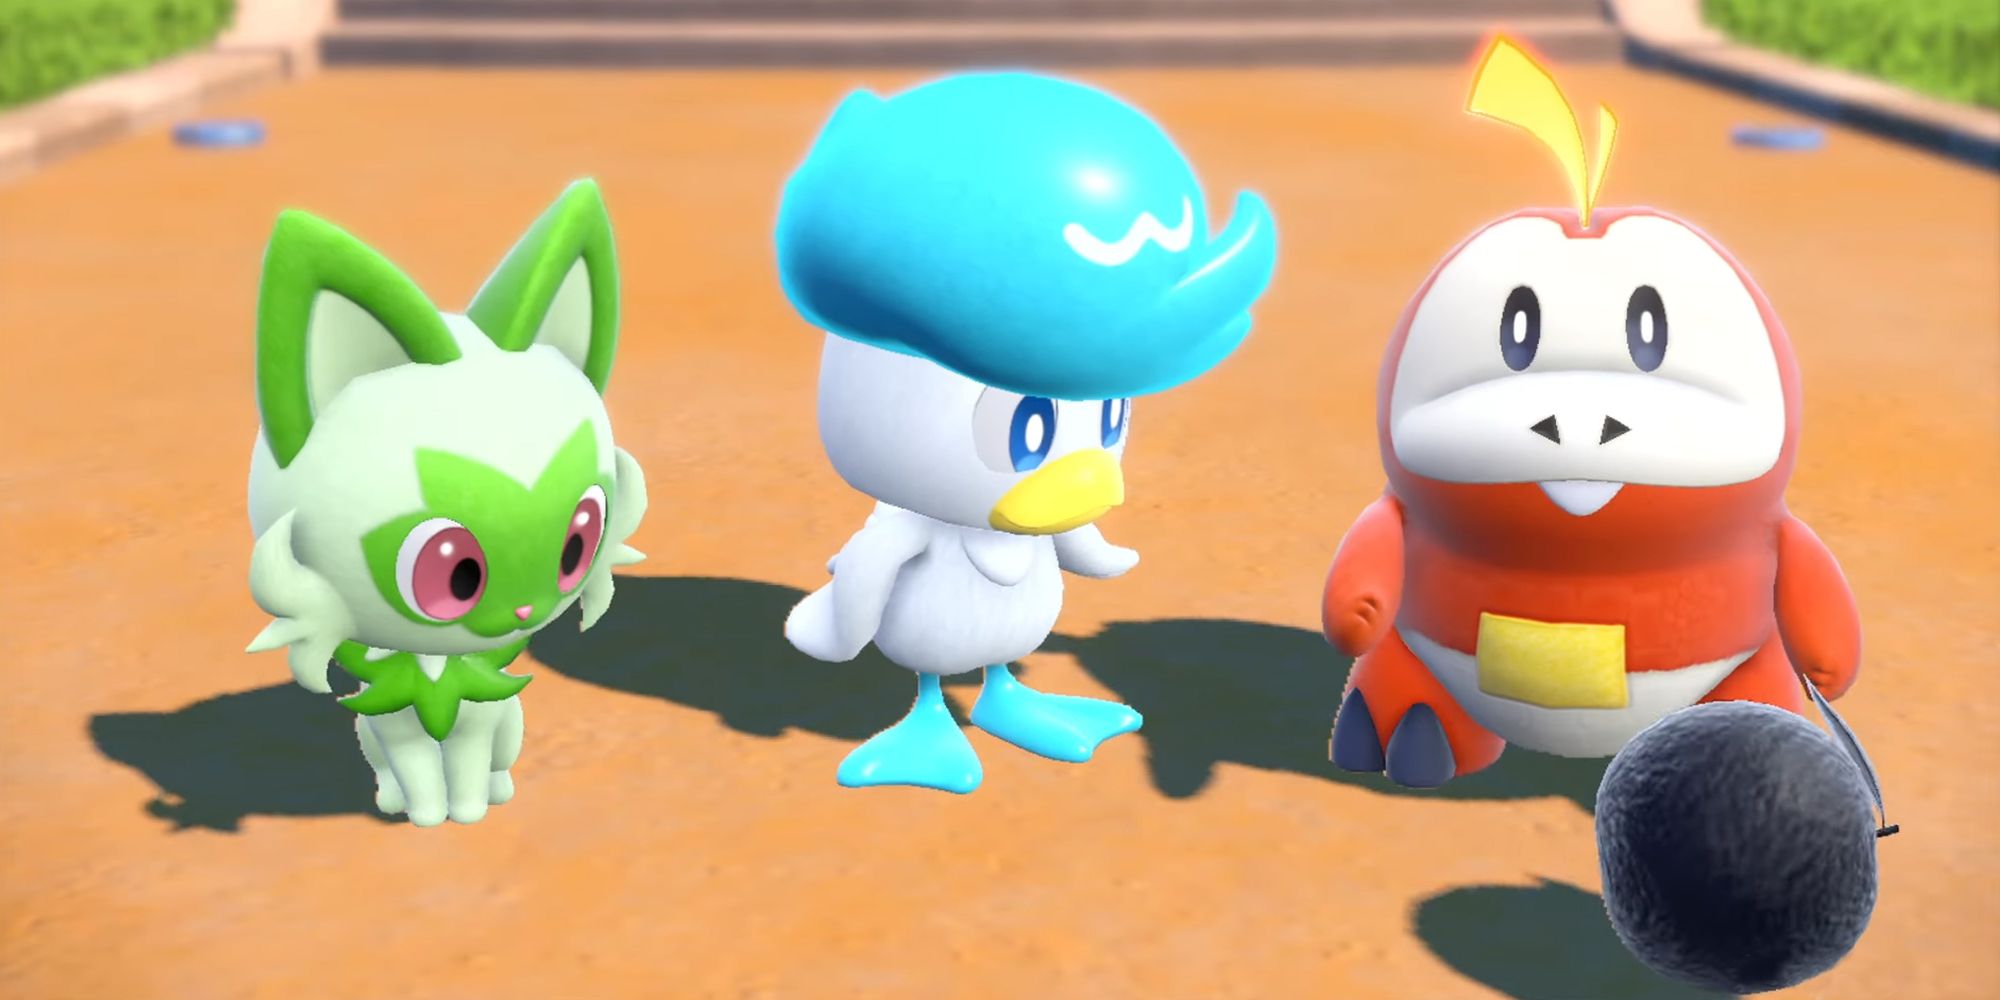 Which Pokemon Scarlet and Violet Starter Is Best? - CNET